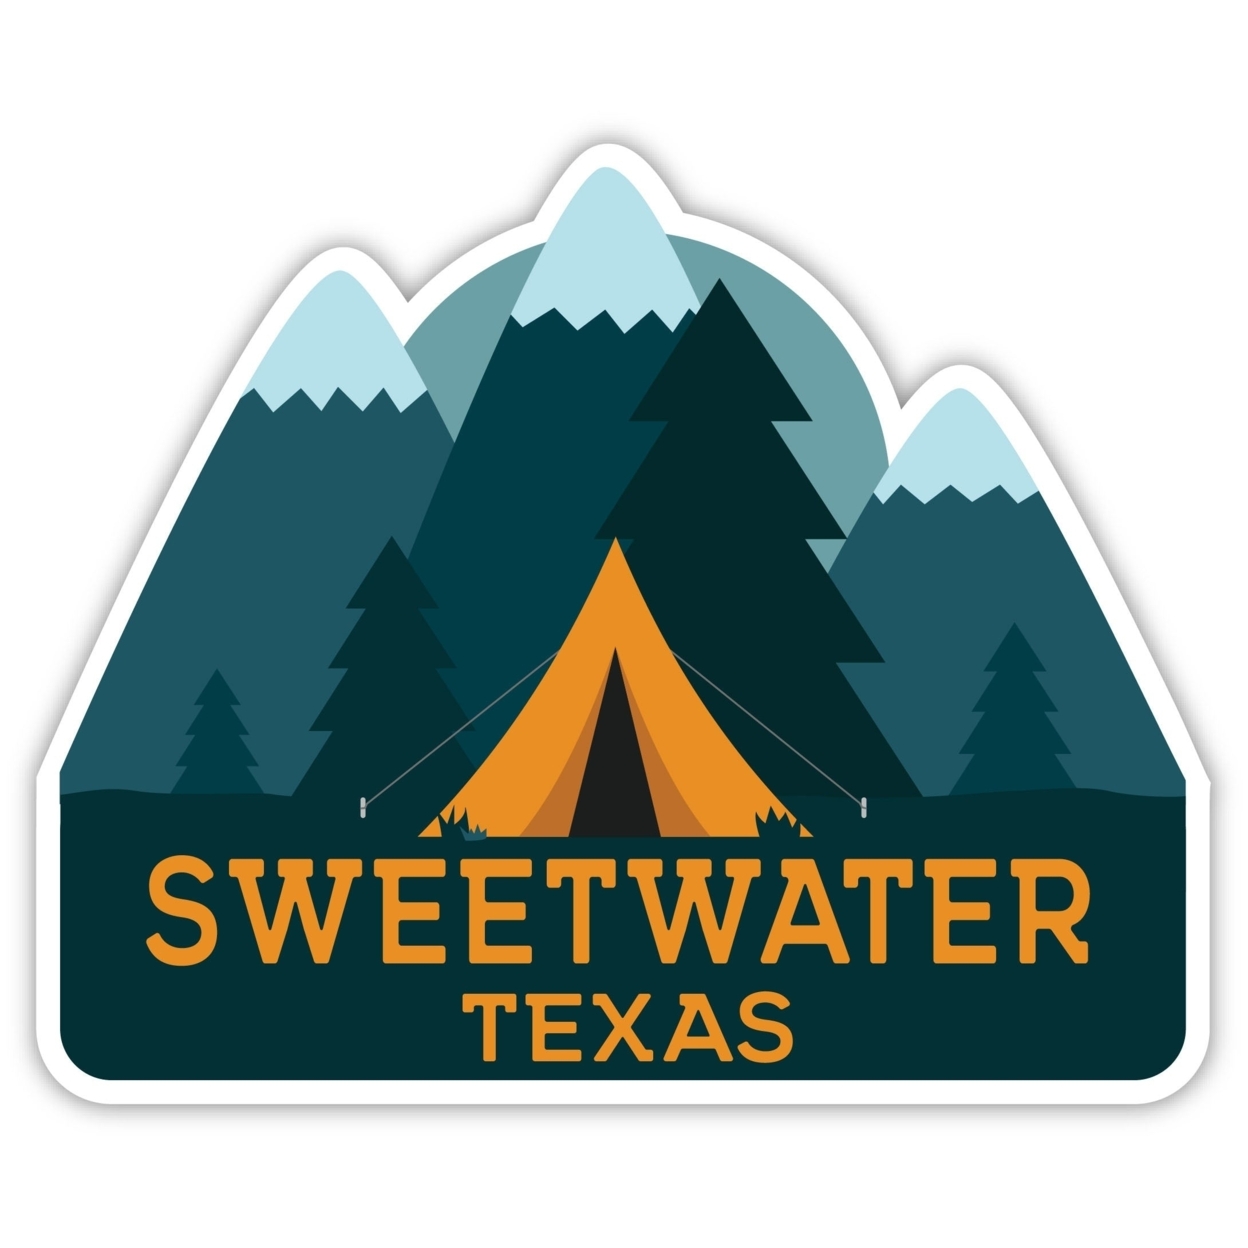 Sweetwater Texas Souvenir Decorative Stickers (Choose Theme And Size) - Single Unit, 2-Inch, Tent